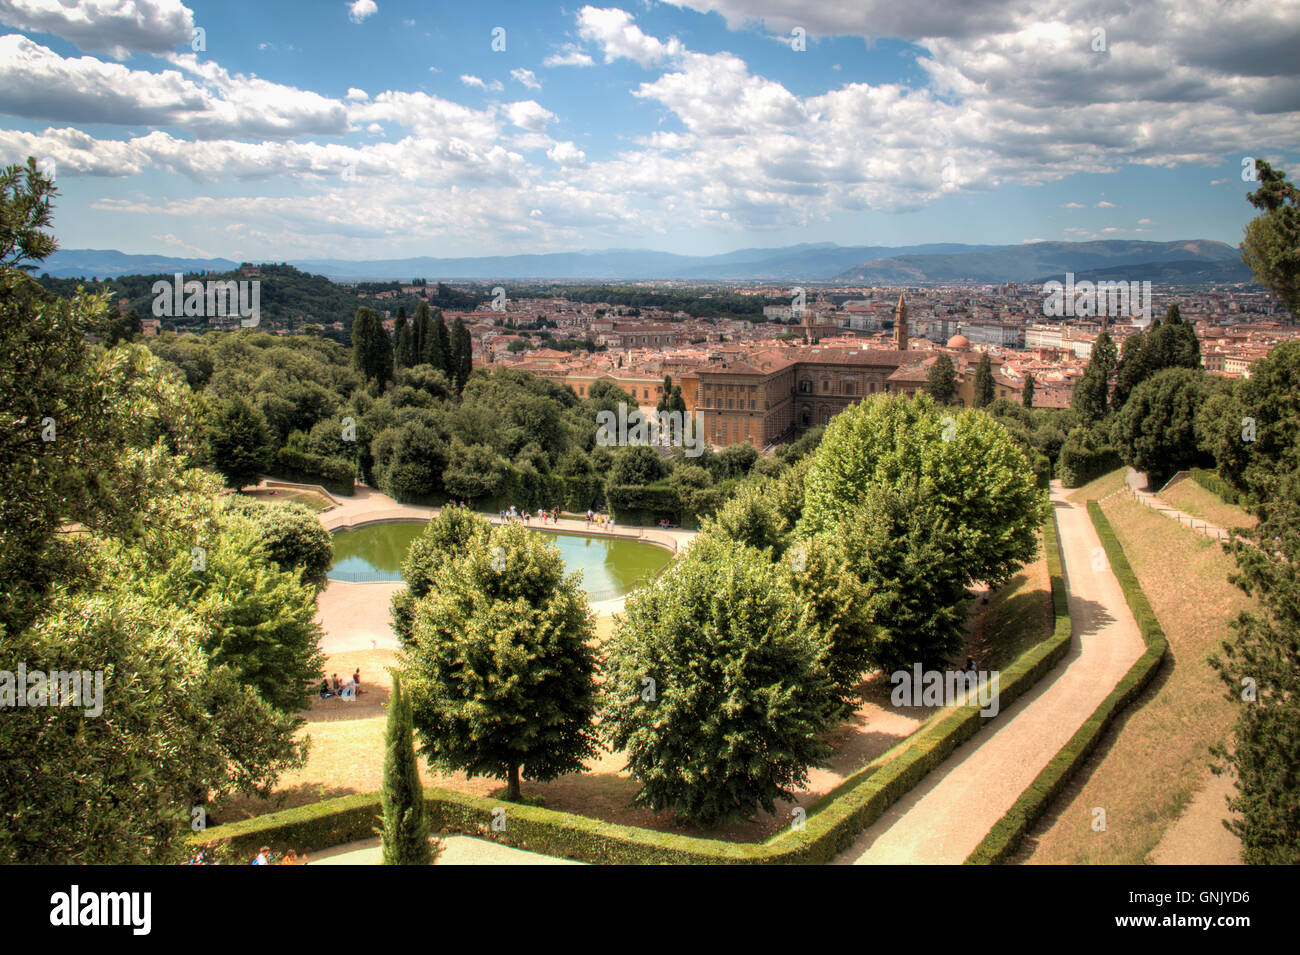 View over the famous Giardino di Boboli garden with a big pond in the middle  in Florence, Italy Stock Photo